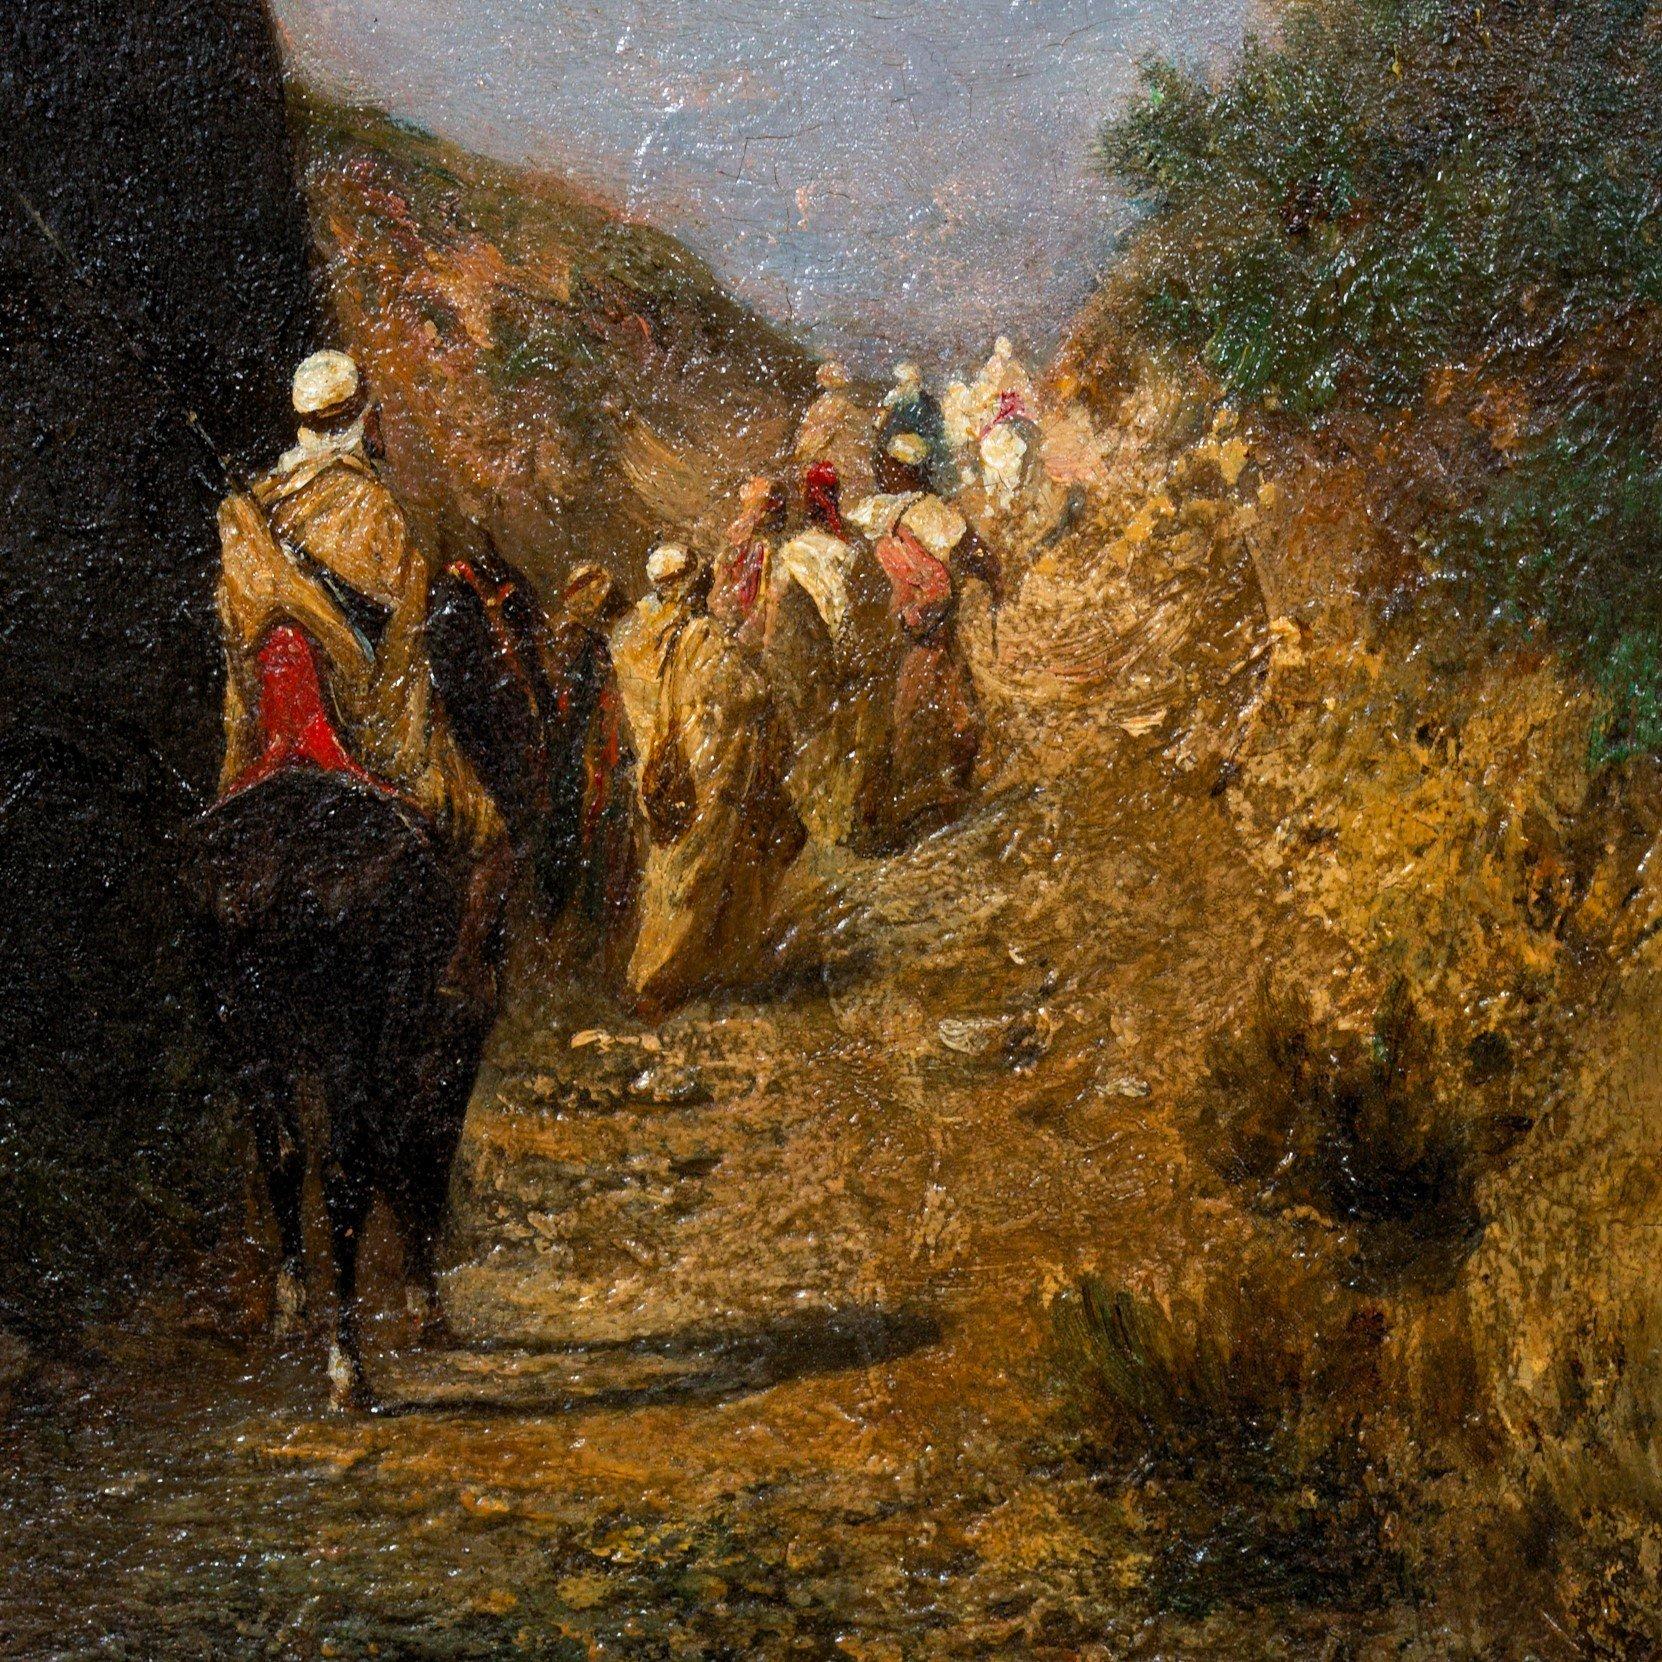 Riders and Bedouins walking on a path near a cliff, Oil on panel by Honoré BOZE For Sale 3